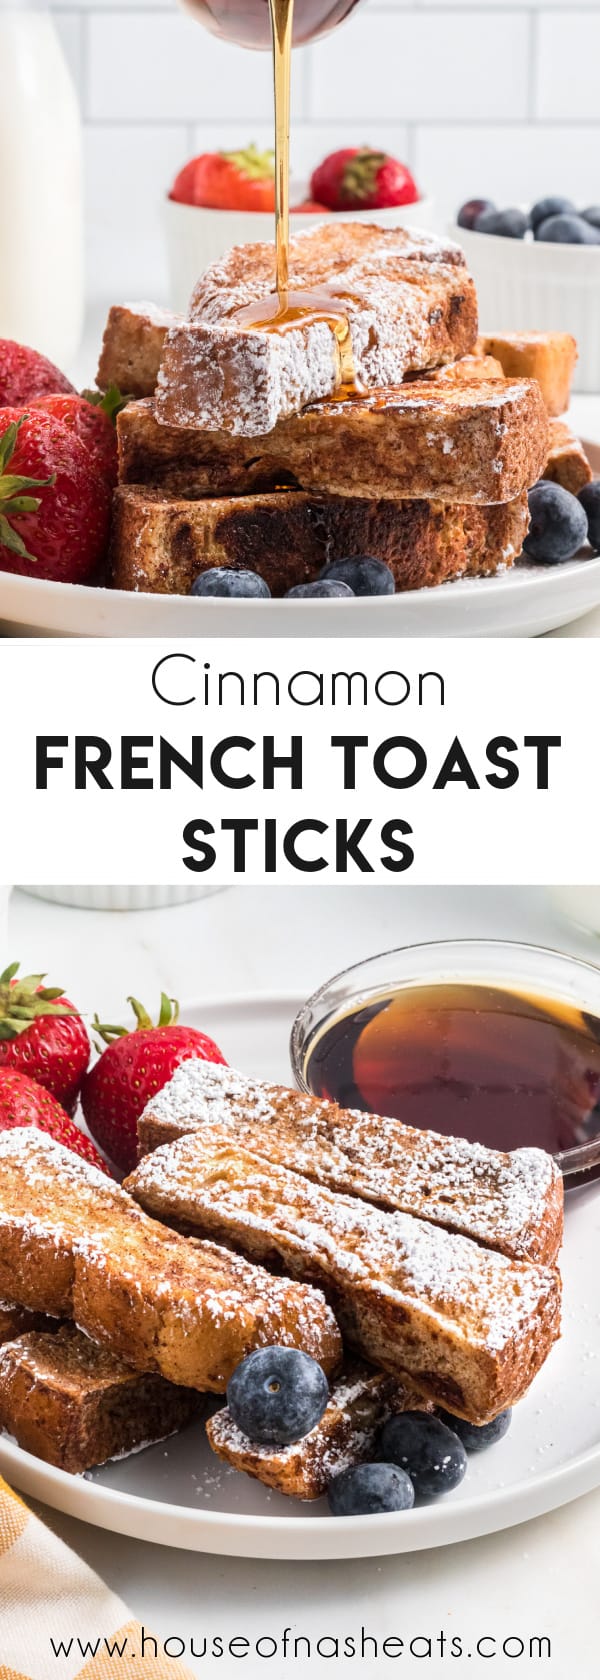 A collage of images of cinnamon French toast sticks with text overlay.